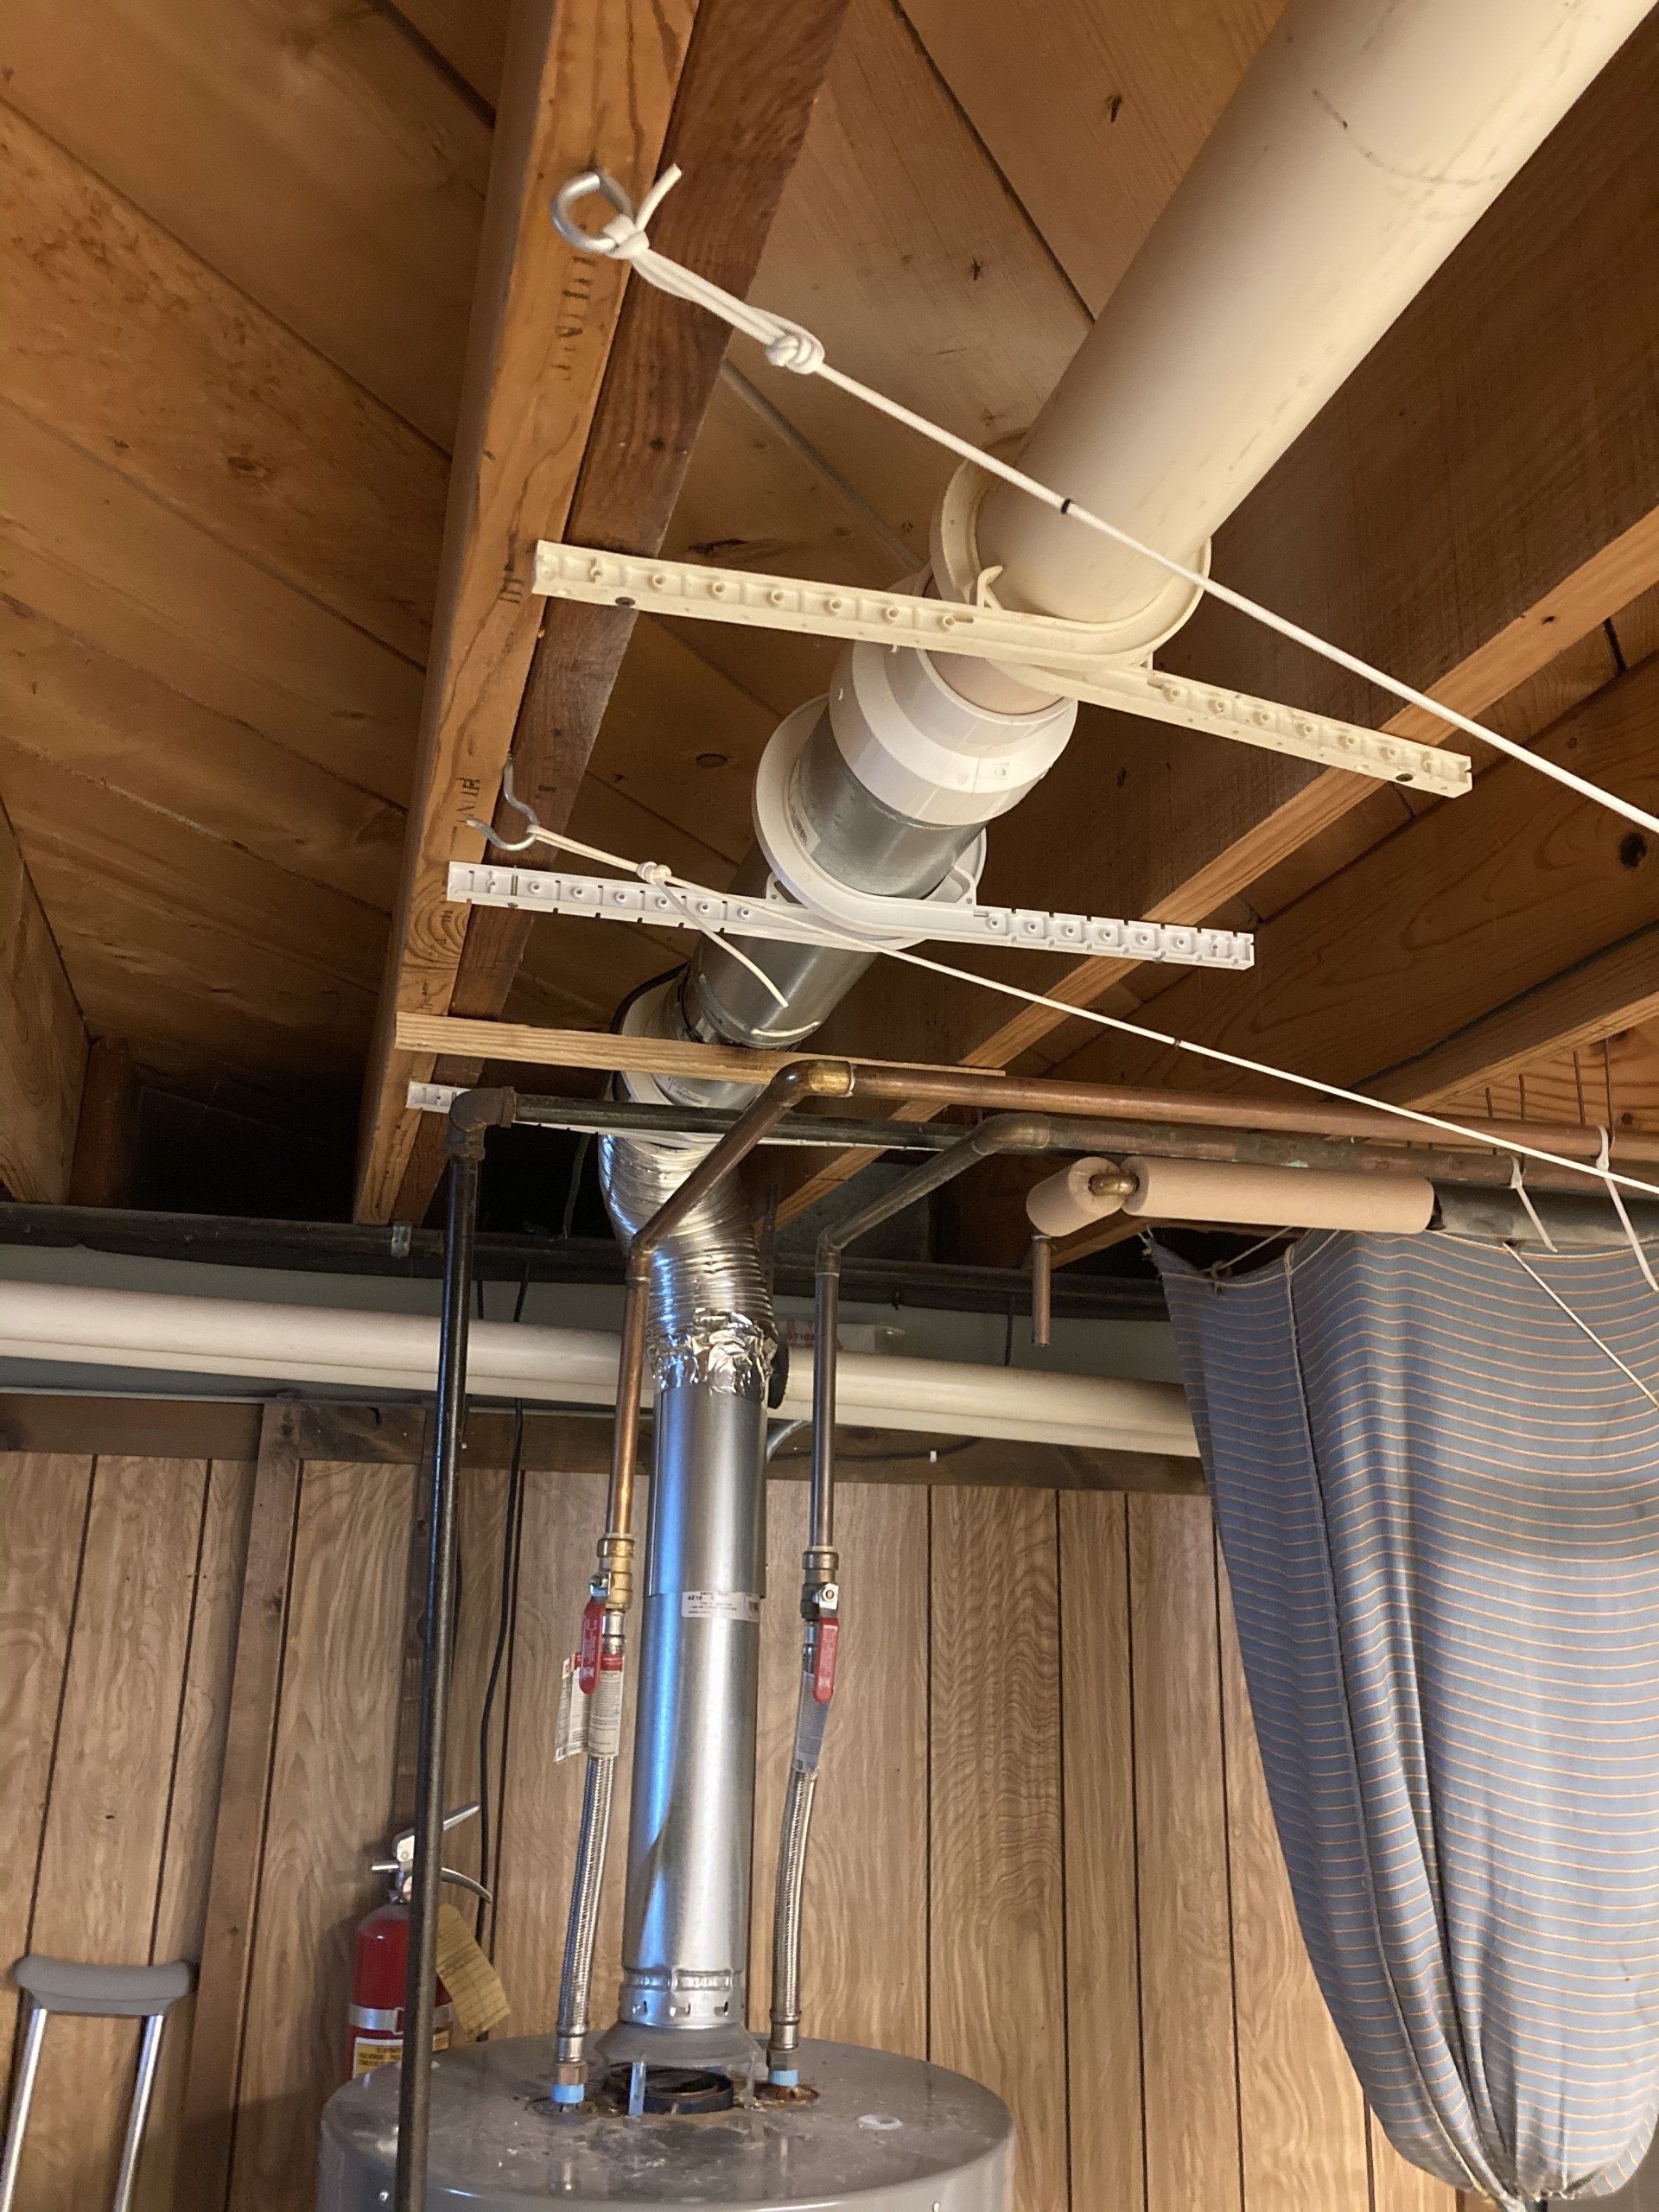 Example of poorly supported and improper water heater venting